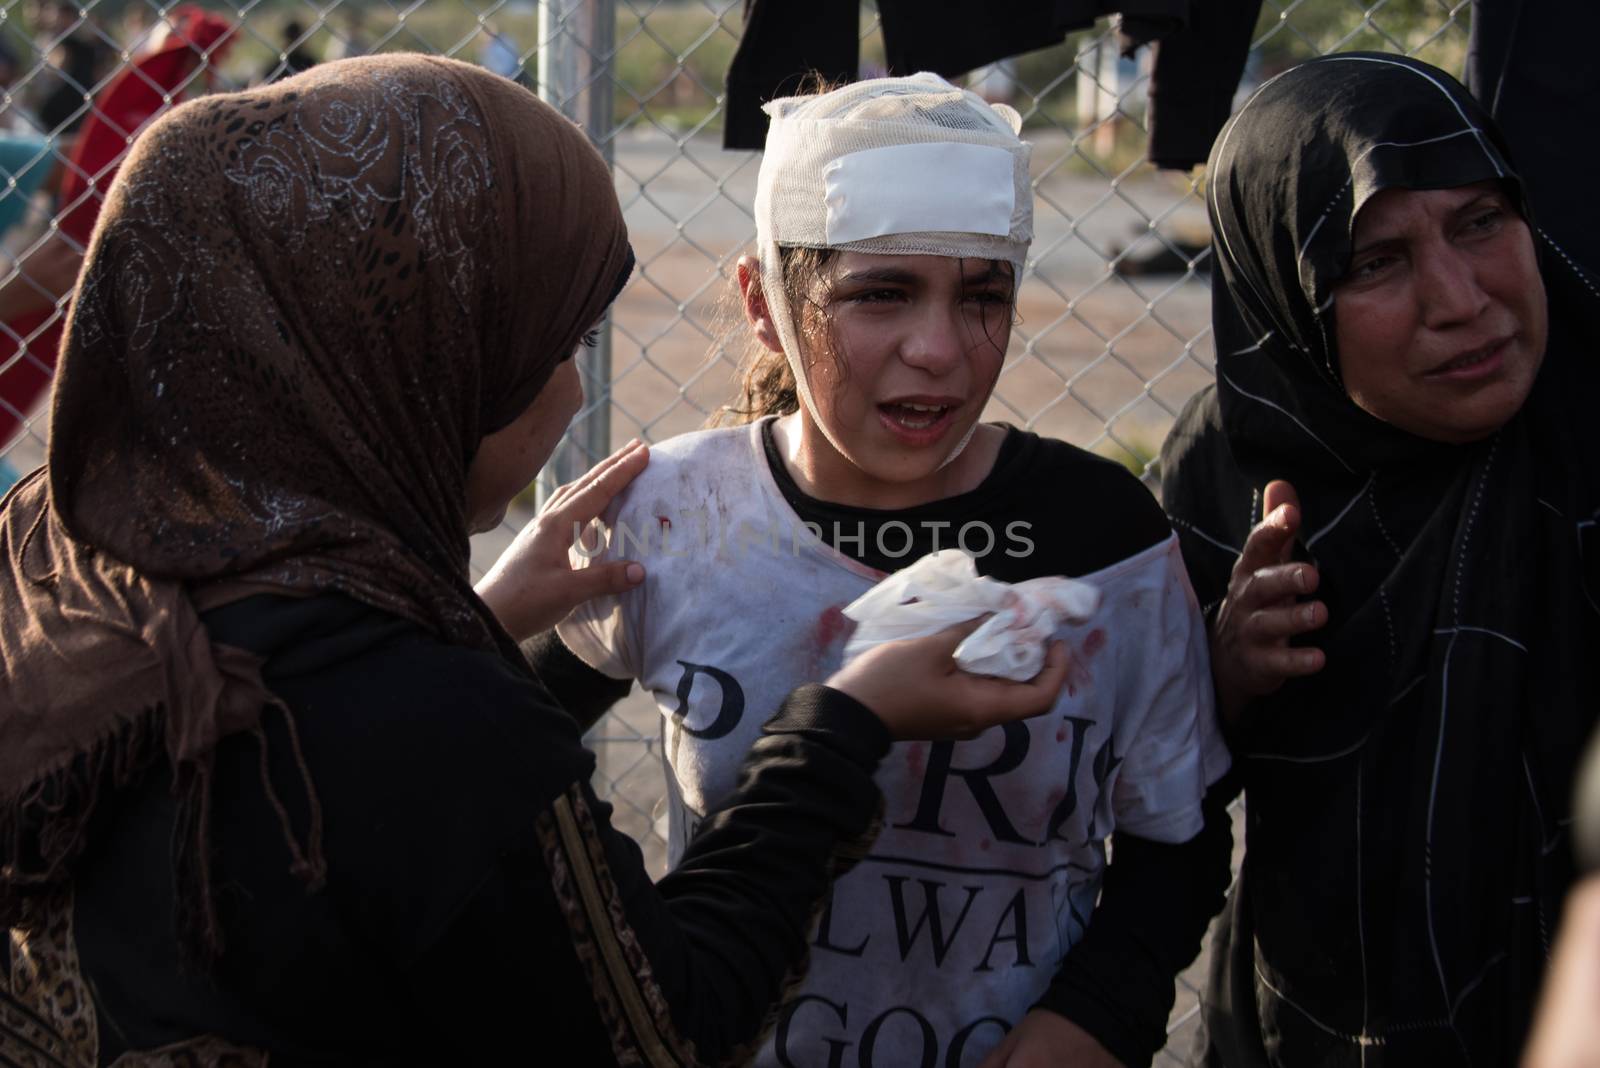 SERBIA, Horgos: Children are treated for injuries as Hungarian riot police clash with refugees waiting to cross the border from the Serbian border town of Horgos on September 16, 2015. 